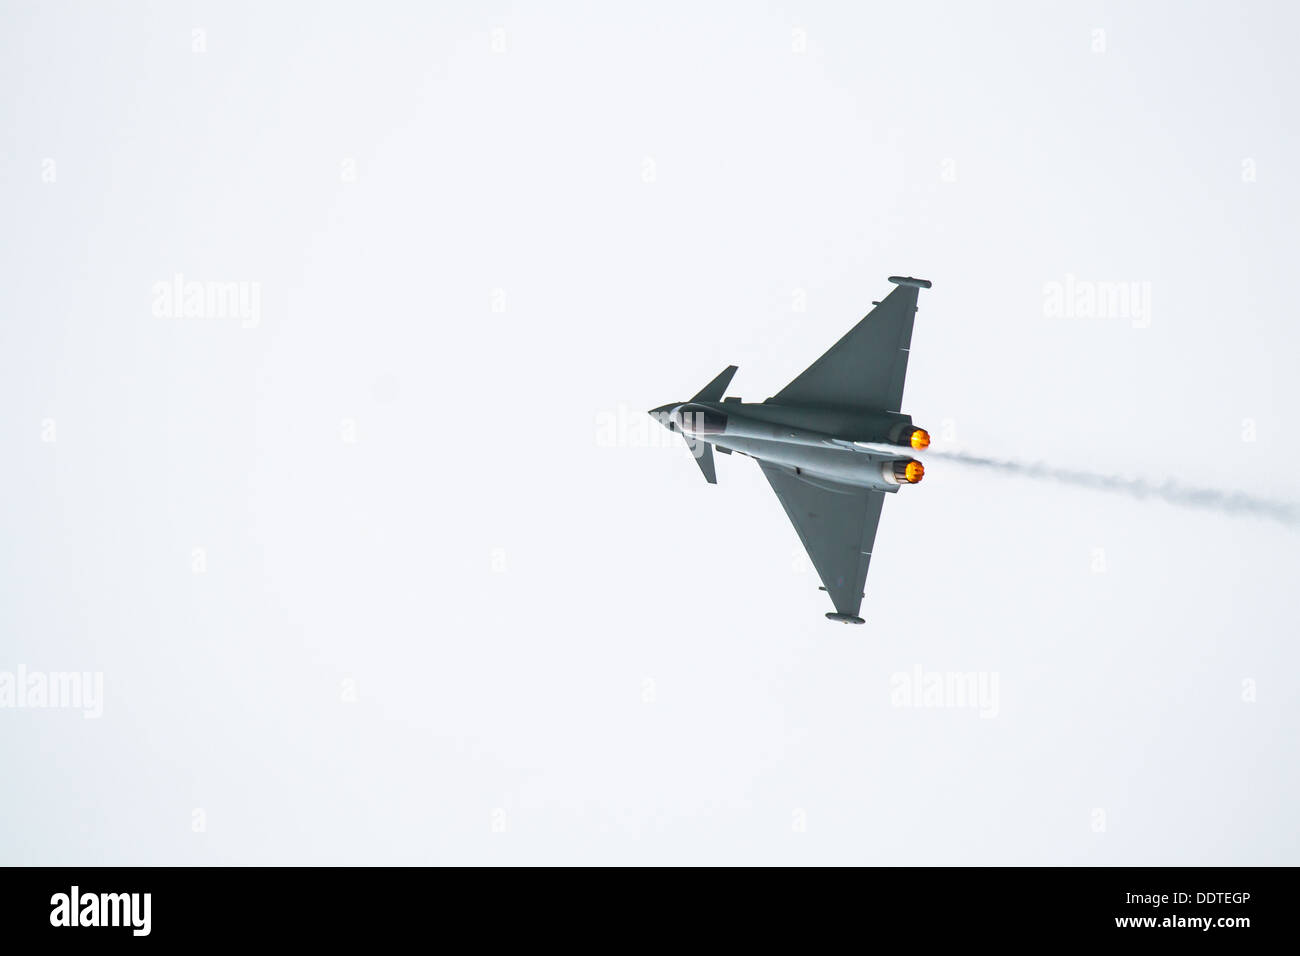 The Eurofighter Typhoon at Eastbourne Airbourne show Stock Photo